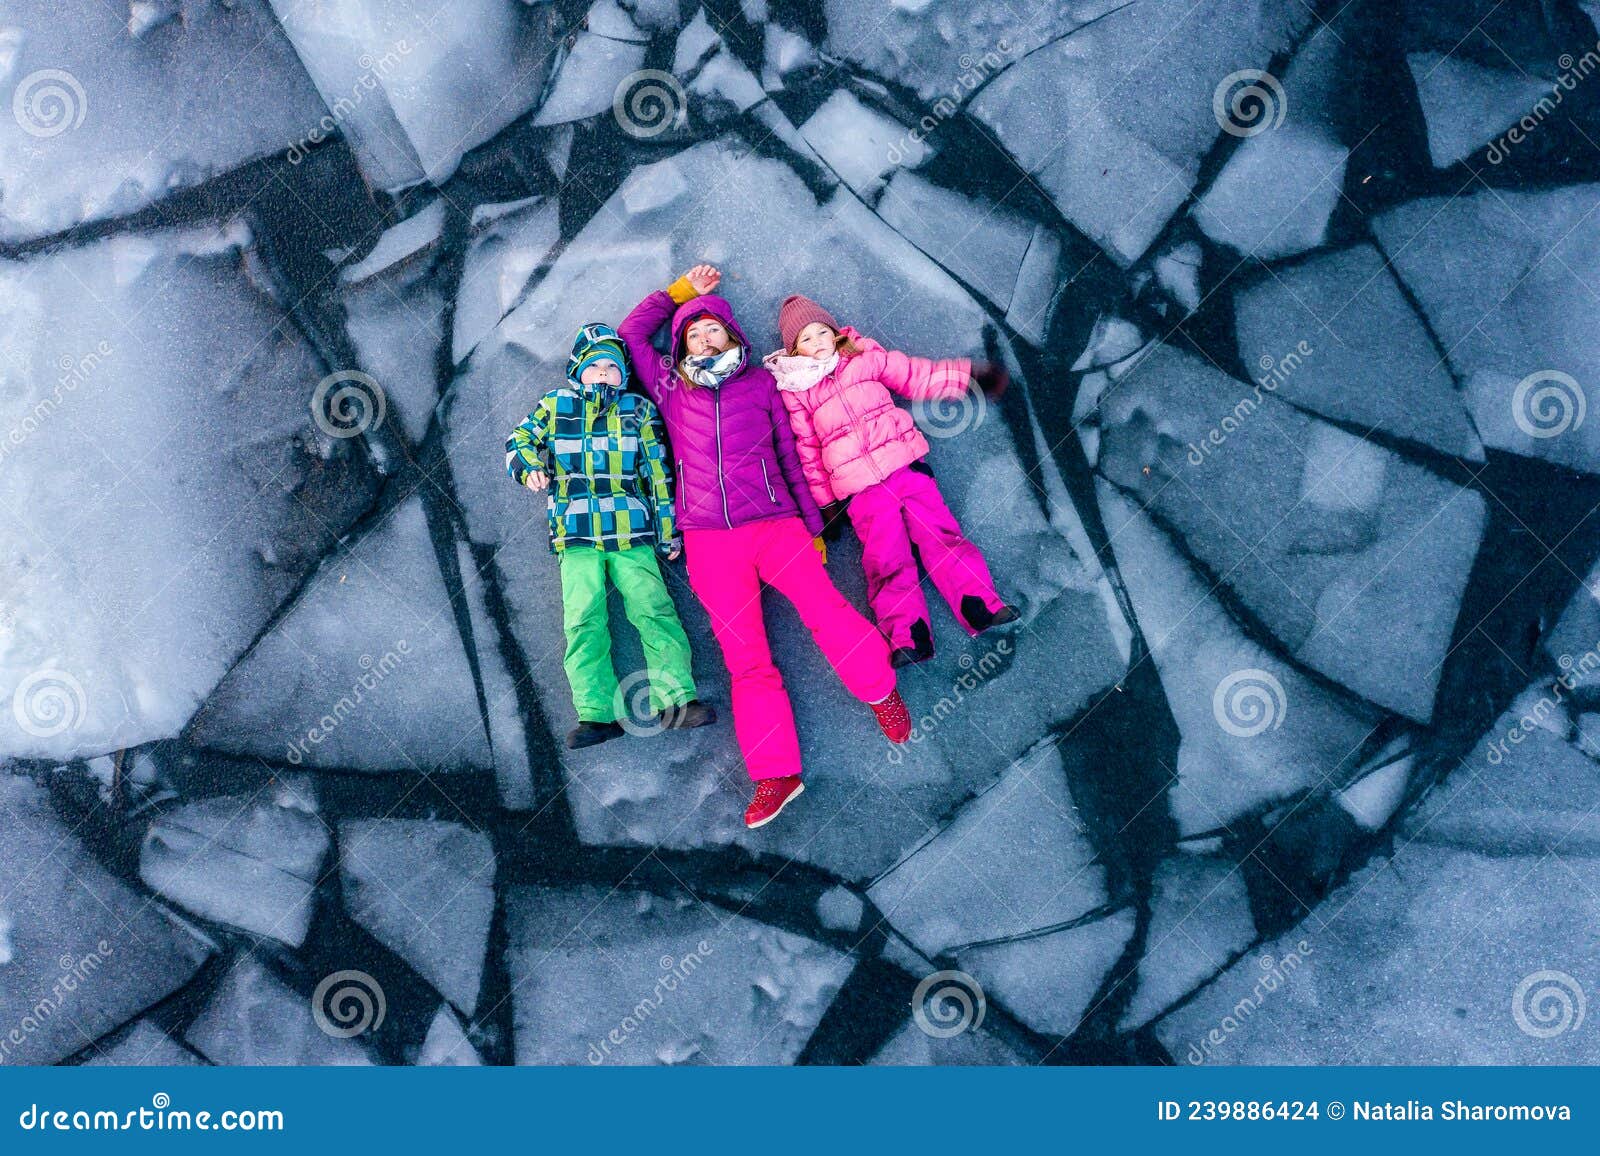 top view of people lying on ice alone. woman and children in bright clothes on broken ice block in water. winter cracked